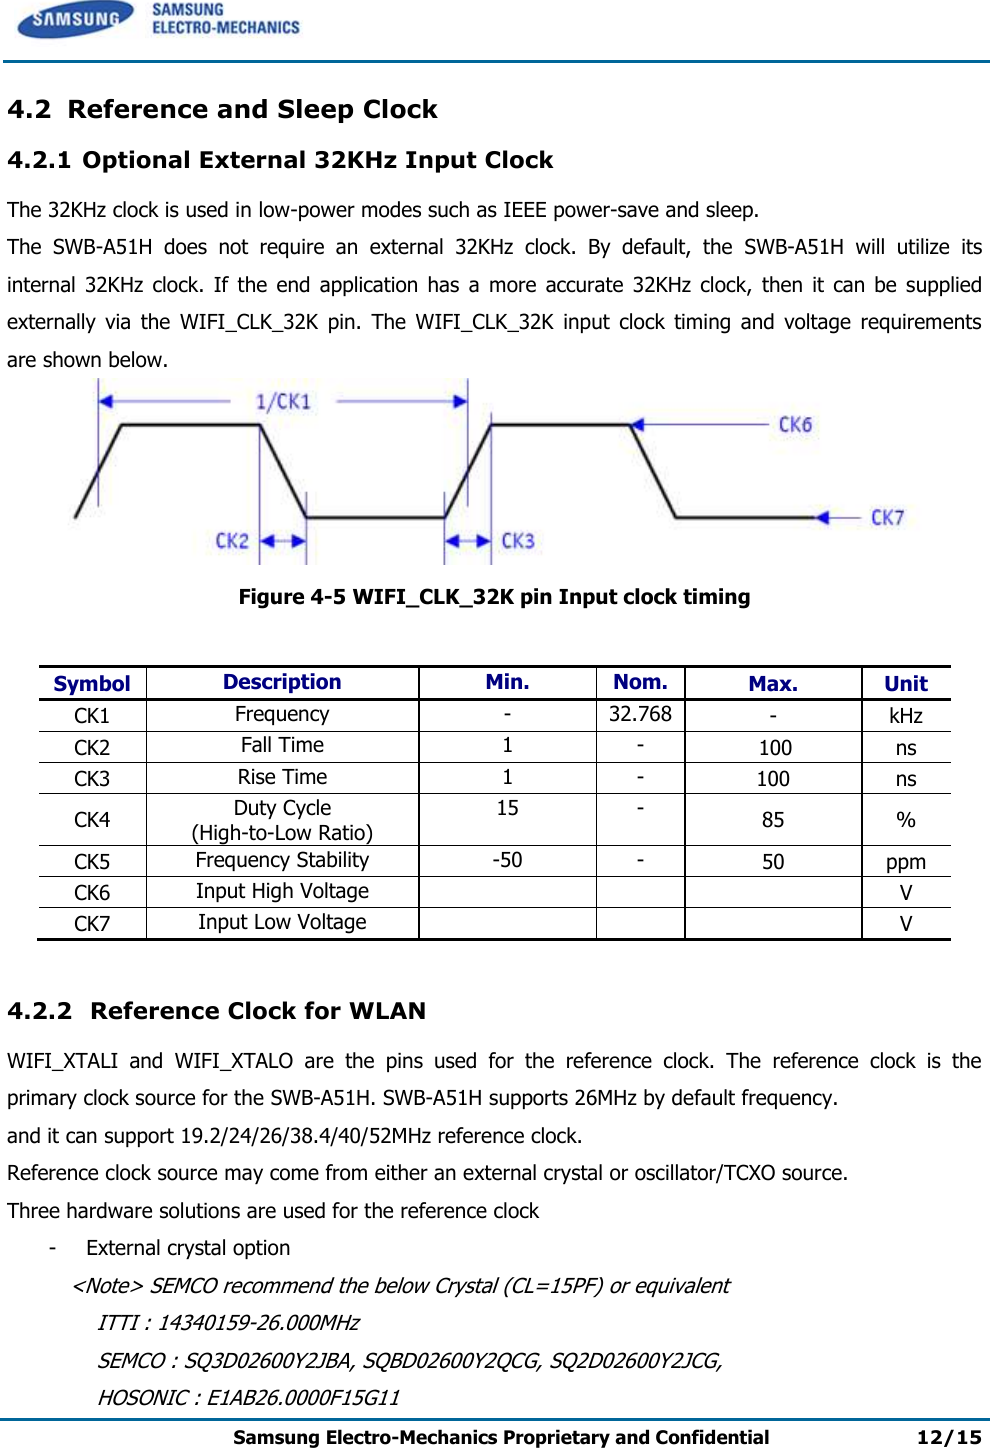     Samsung Electro-Mechanics Proprietary and Confidential 12/15  4.2 Reference and Sleep Clock 4.2.1 Optional External 32KHz Input Clock  The 32KHz clock is used in low-power modes such as IEEE power-save and sleep. The  SWB-A51H  does  not  require  an  external  32KHz  clock.  By  default,  the  SWB-A51H  will  utilize  its internal  32KHz  clock.  If  the  end  application  has  a  more  accurate  32KHz  clock,  then  it  can  be  supplied externally  via  the  WIFI_CLK_32K  pin.  The  WIFI_CLK_32K  input  clock  timing  and  voltage  requirements are shown below.  Figure 4-5 WIFI_CLK_32K pin Input clock timing  Symbol Description Min. Nom. Max. Unit CK1 Frequency - 32.768 - kHz CK2 Fall Time 1 - 100 ns CK3 Rise Time 1 - 100 ns CK4 Duty Cycle (High-to-Low Ratio) 15 - 85 % CK5 Frequency Stability -50 - 50 ppm CK6 Input High Voltage    V CK7 Input Low Voltage    V  4.2.2  Reference Clock for WLAN WIFI_XTALI  and  WIFI_XTALO  are  the  pins  used  for  the  reference  clock.  The  reference  clock  is  the primary clock source for the SWB-A51H. SWB-A51H supports 26MHz by default frequency. and it can support 19.2/24/26/38.4/40/52MHz reference clock. Reference clock source may come from either an external crystal or oscillator/TCXO source. Three hardware solutions are used for the reference clock - External crystal option  &lt;Note&gt; SEMCO recommend the below Crystal (CL=15PF) or equivalent  ITTI : 14340159-26.000MHz   SEMCO : SQ3D02600Y2JBA, SQBD02600Y2QCG, SQ2D02600Y2JCG,  HOSONIC : E1AB26.0000F15G11 